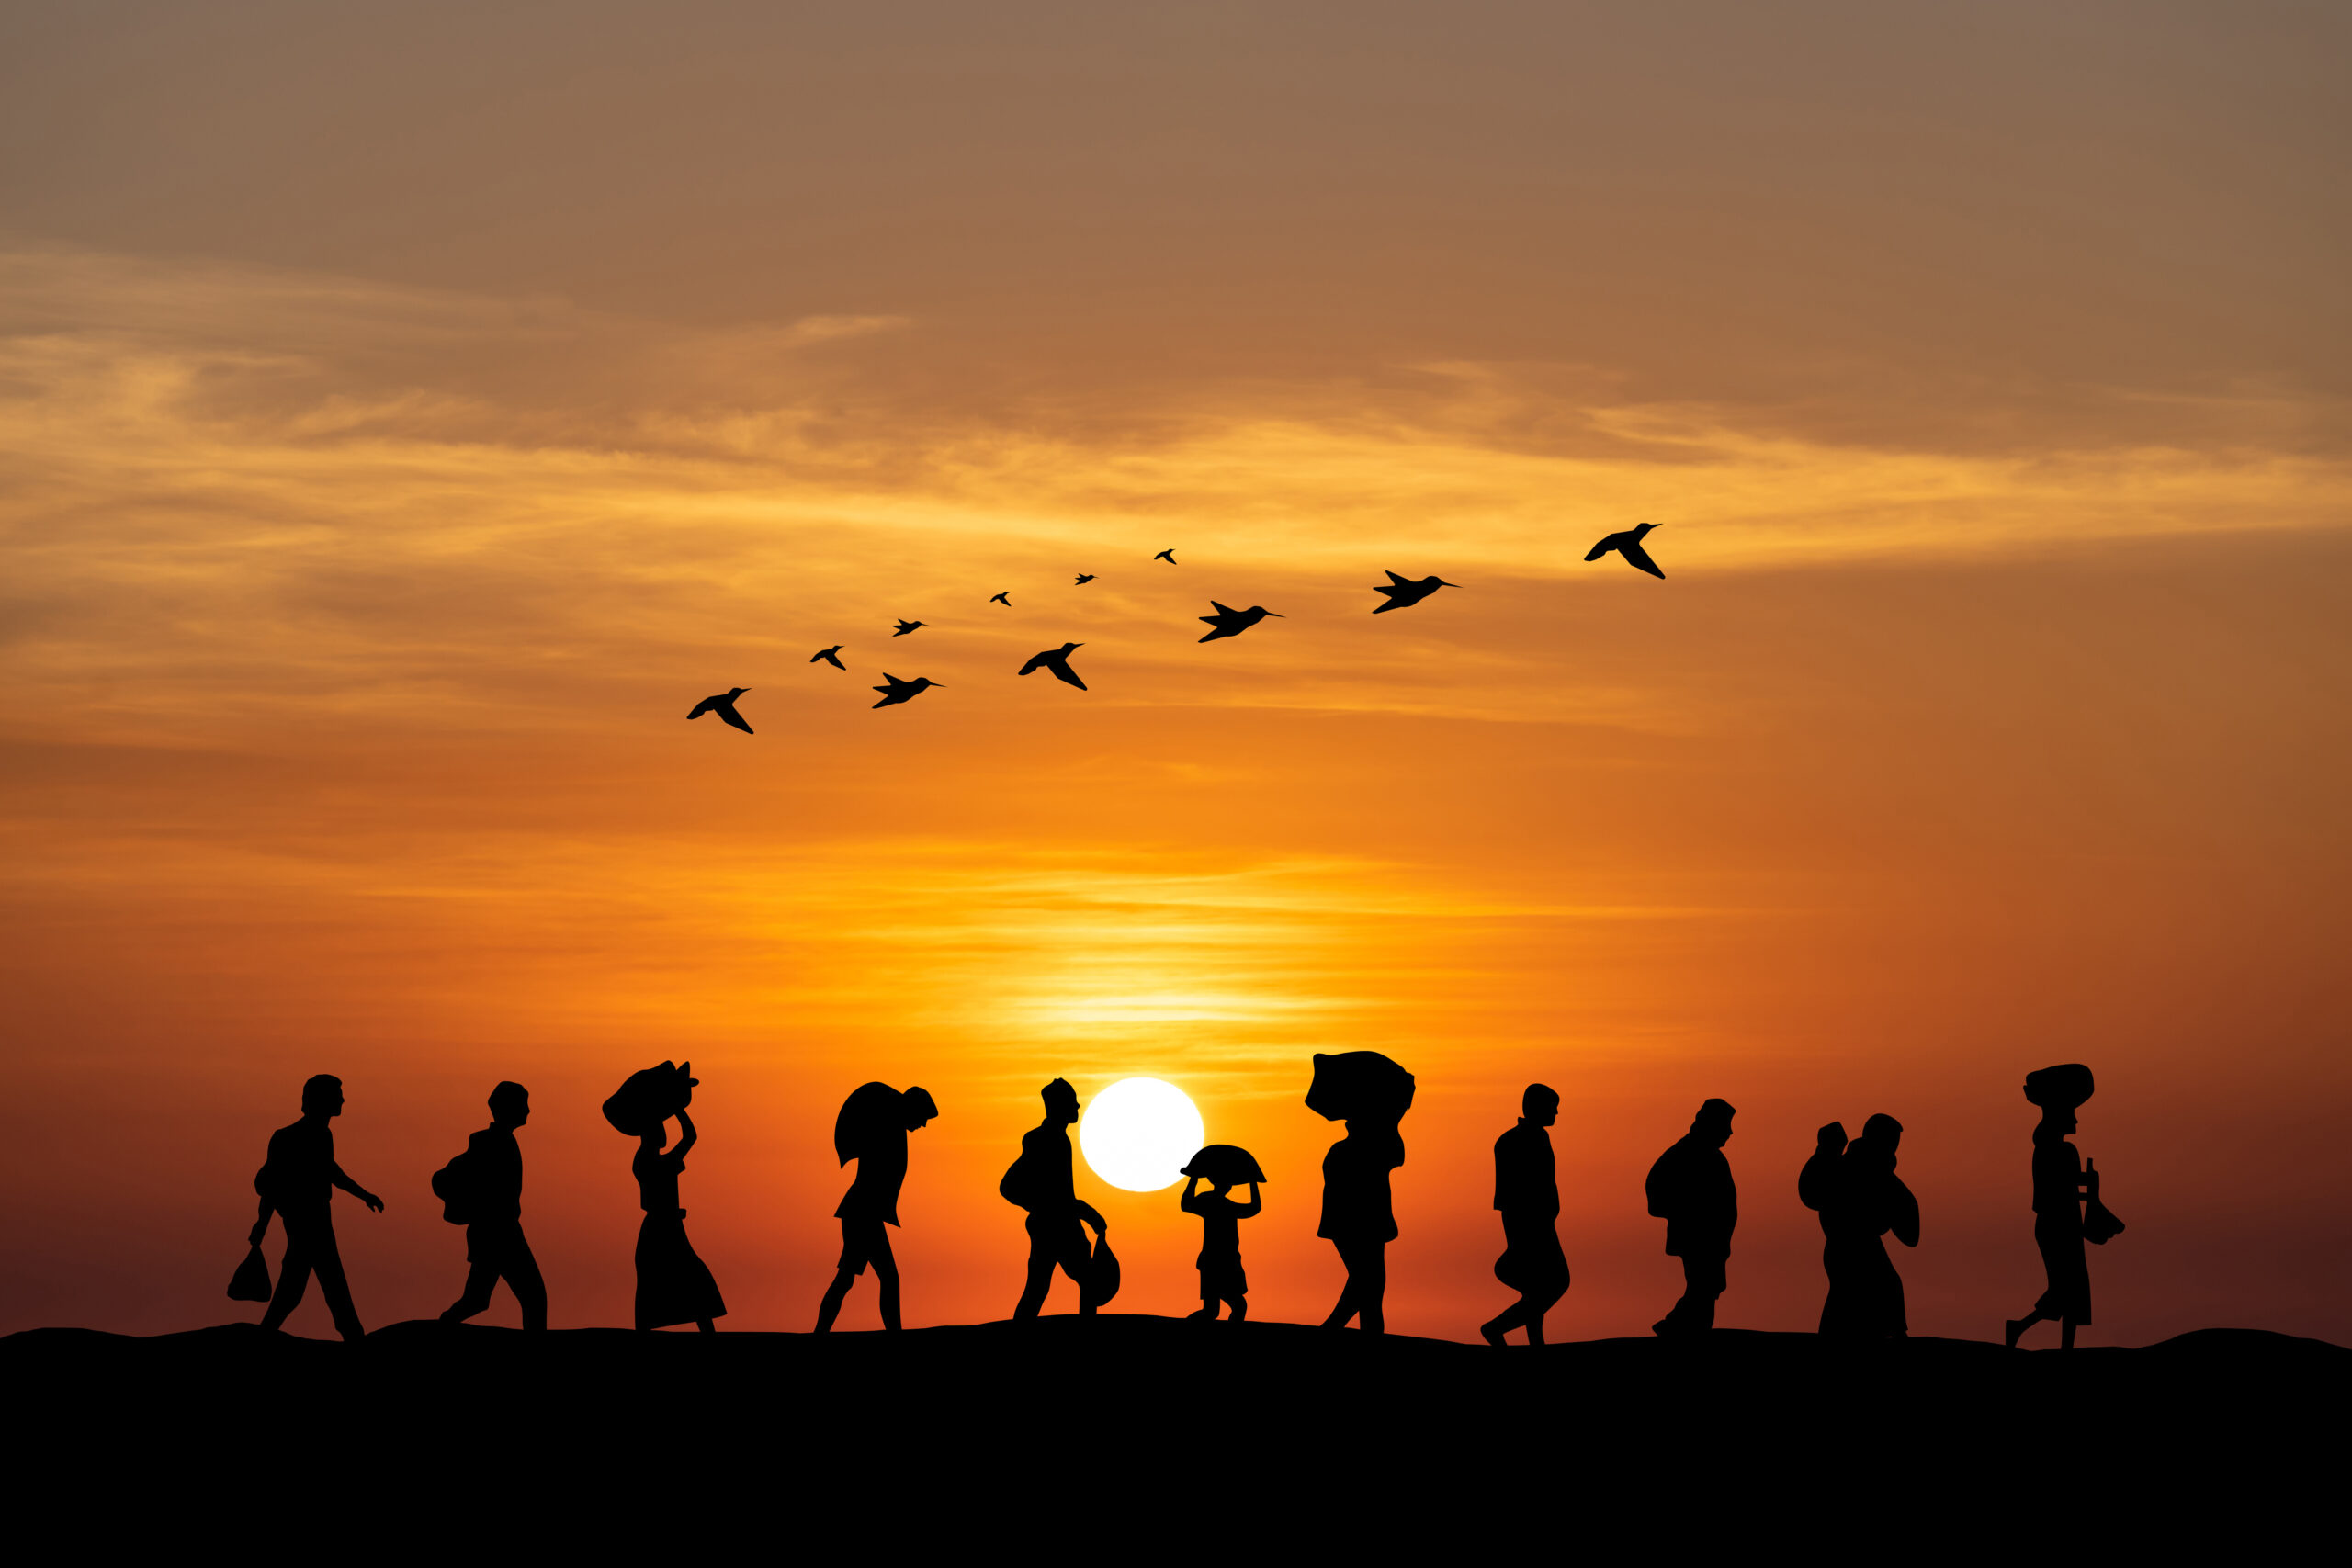 Silhouette image of people walking against a sunset, carrying belongings with bird flying over head